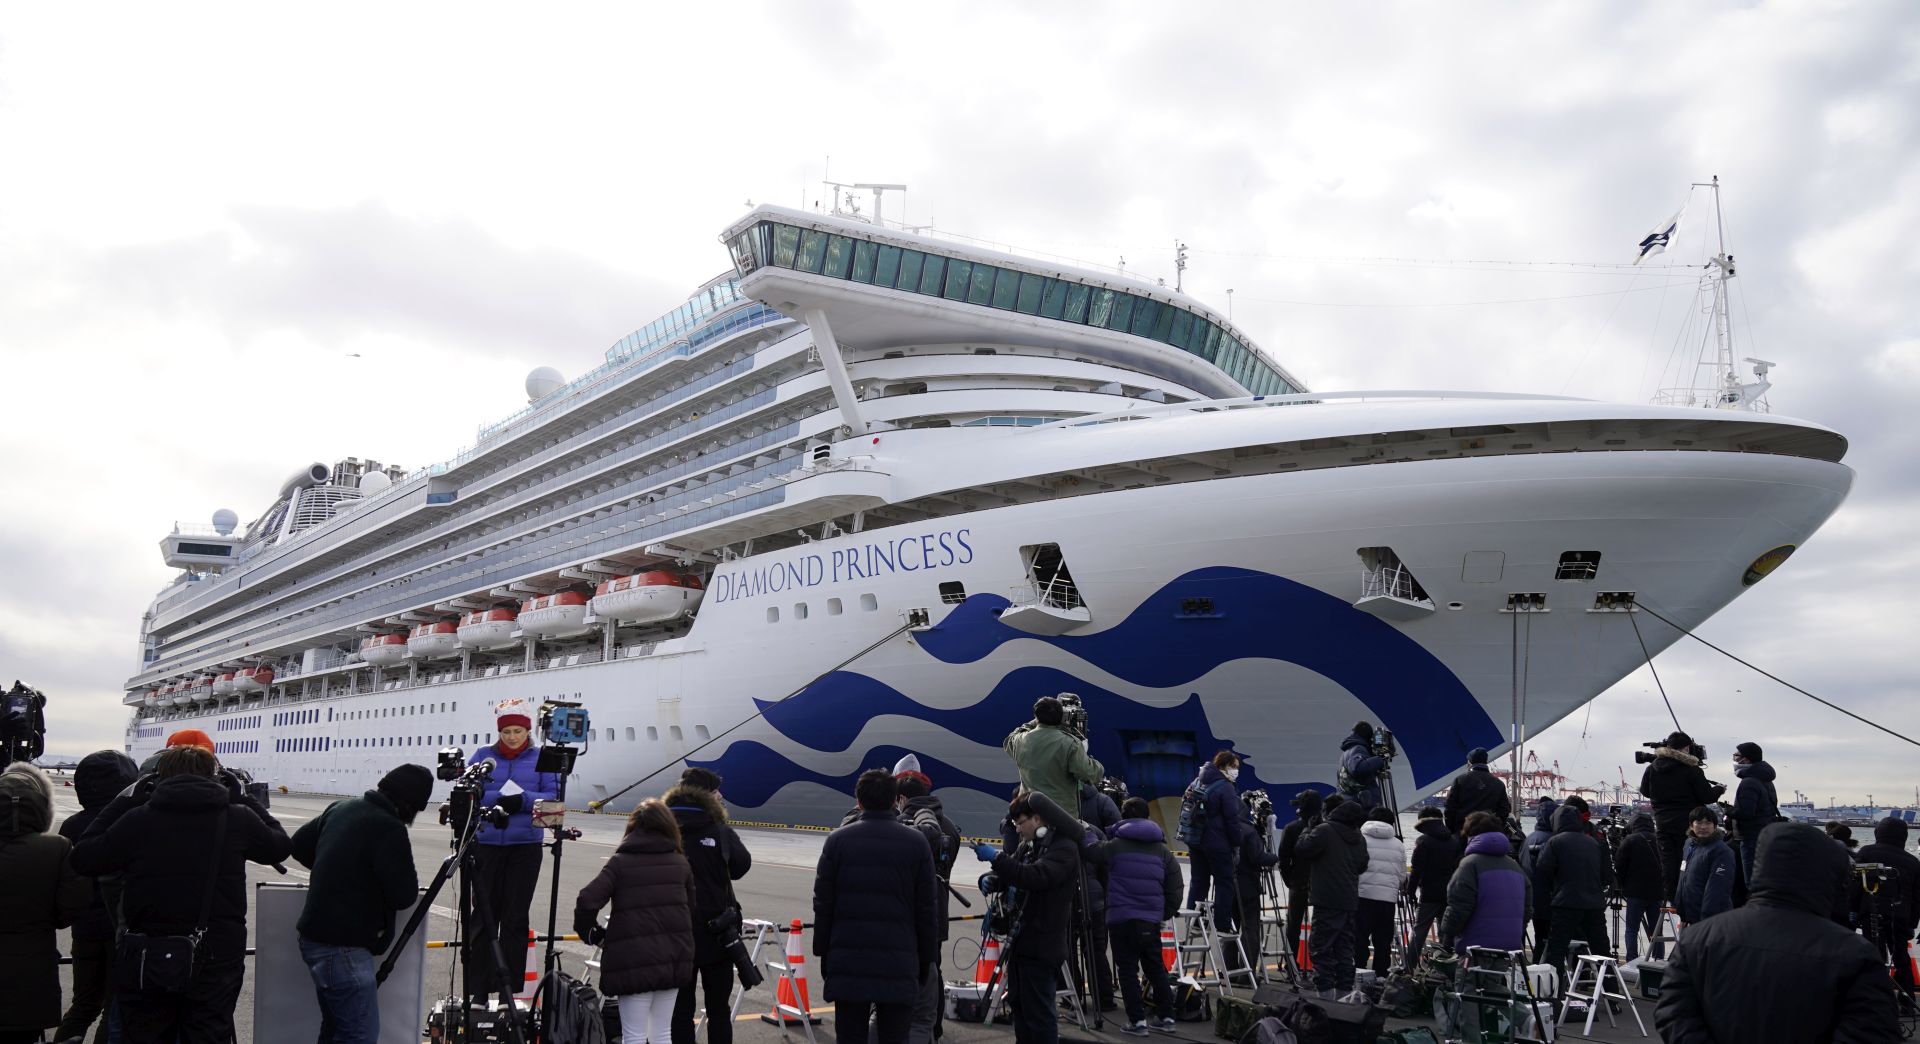 epa08196603 Media gather before the Diamond Princess cruise ship that docked at the port of Yokohama in Yokohama, Japan, 06 February 2020. The cruise ship with around 3,700 passengers on board docked in the morning to restock supplies. According to latest media reports, 10 more people have tested positive for the new coronavirus. A total number of 20 people from the ship have been infected by the coronavirus, raising the number of infections to 45 in Japan. According to media reports, around 28,000 people are infected and at least 563 have died from coronavirus.  EPA/FRANCK ROBICHON